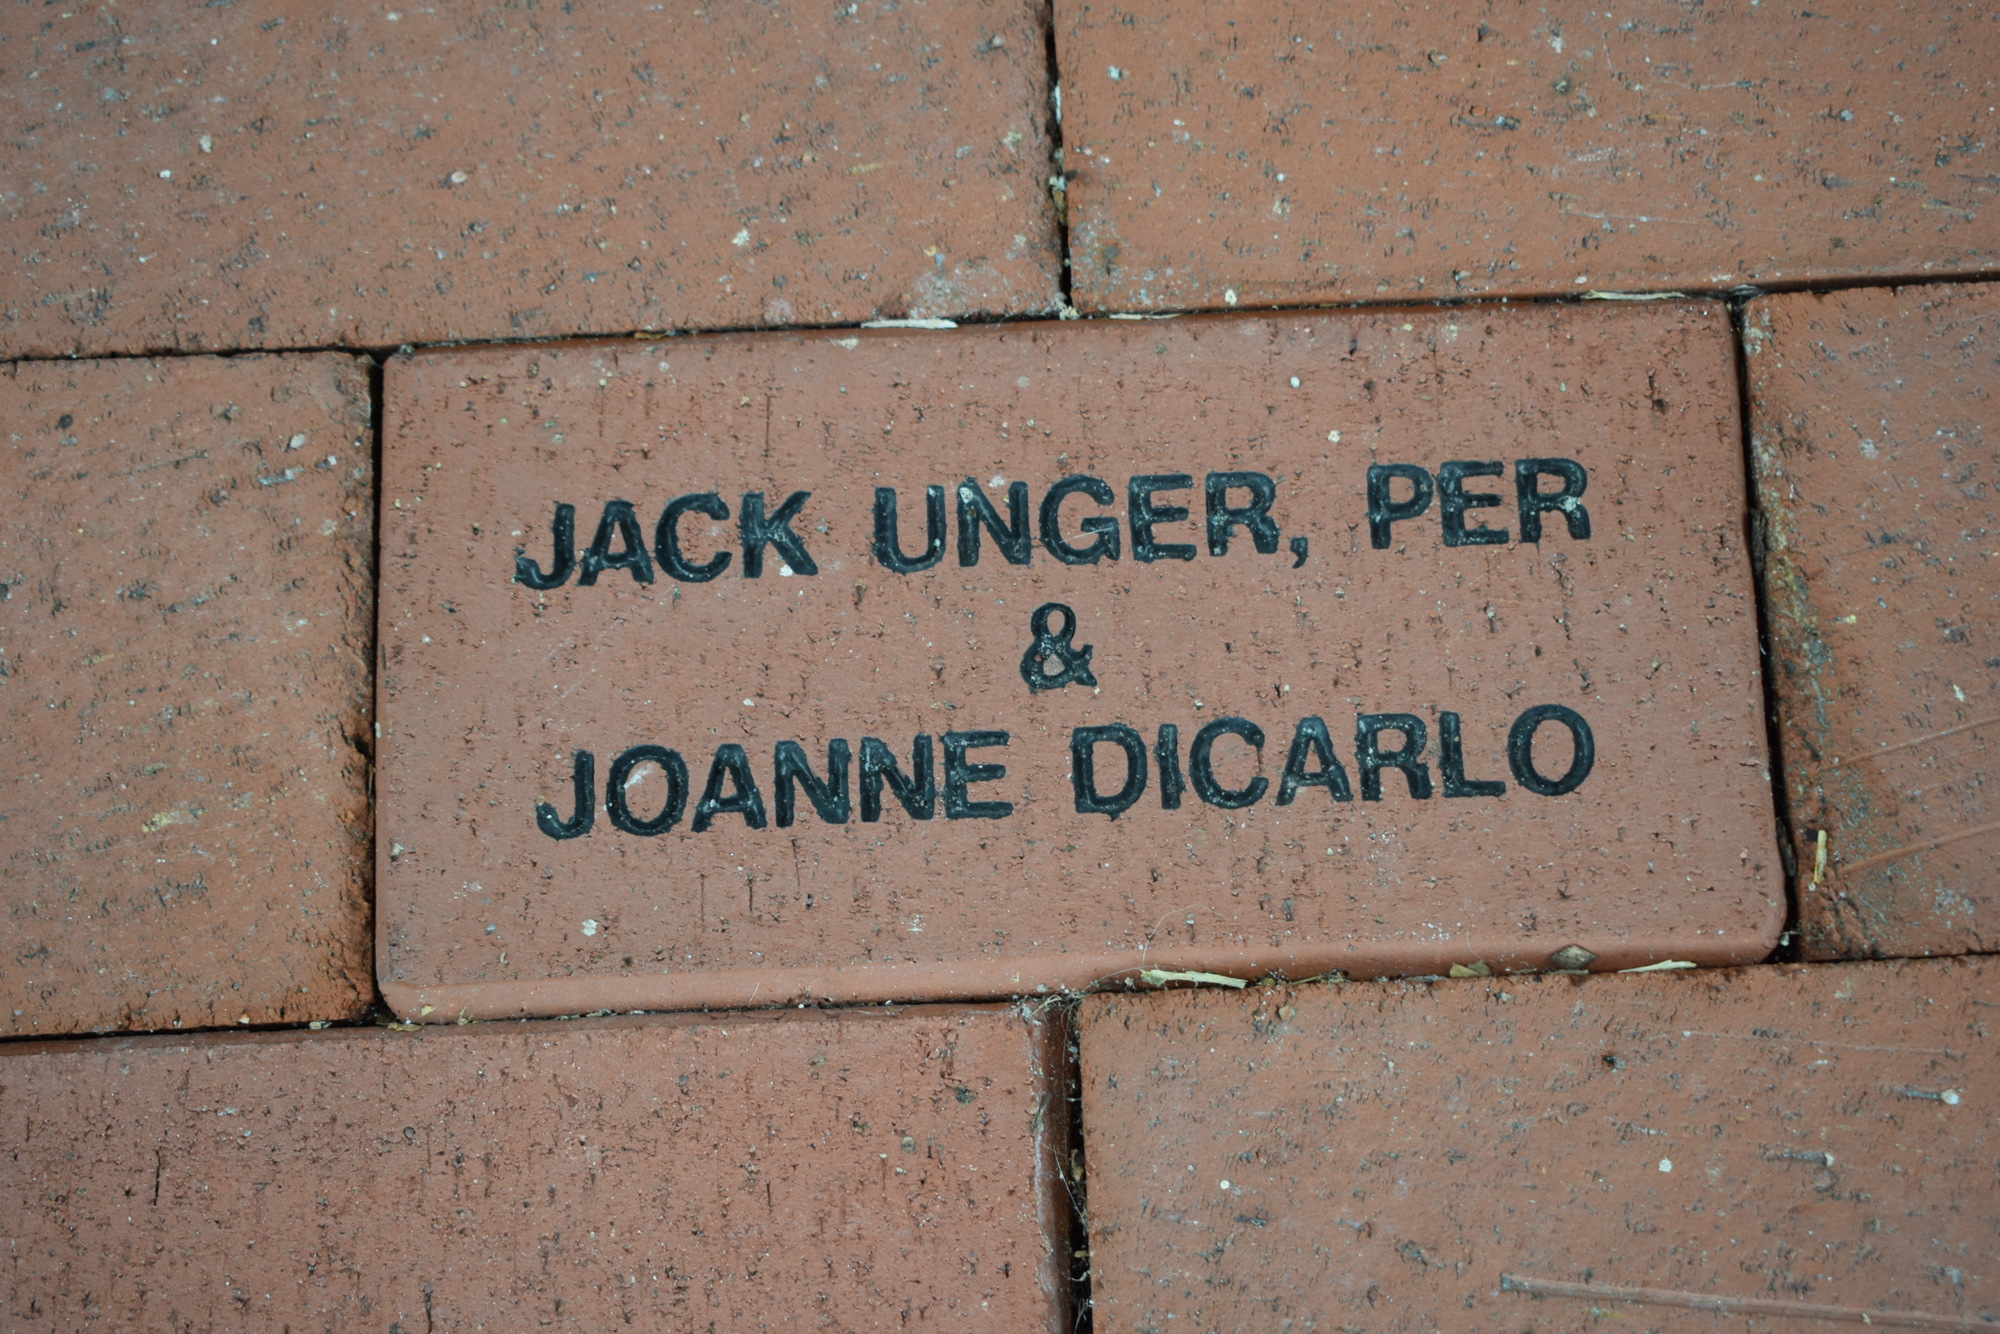 Jack Unger was a founding member of the Lakewood Ranch Elks and a commemorative brick outside the lodge bears his name along with longtime companion Joanne DiCarlo.